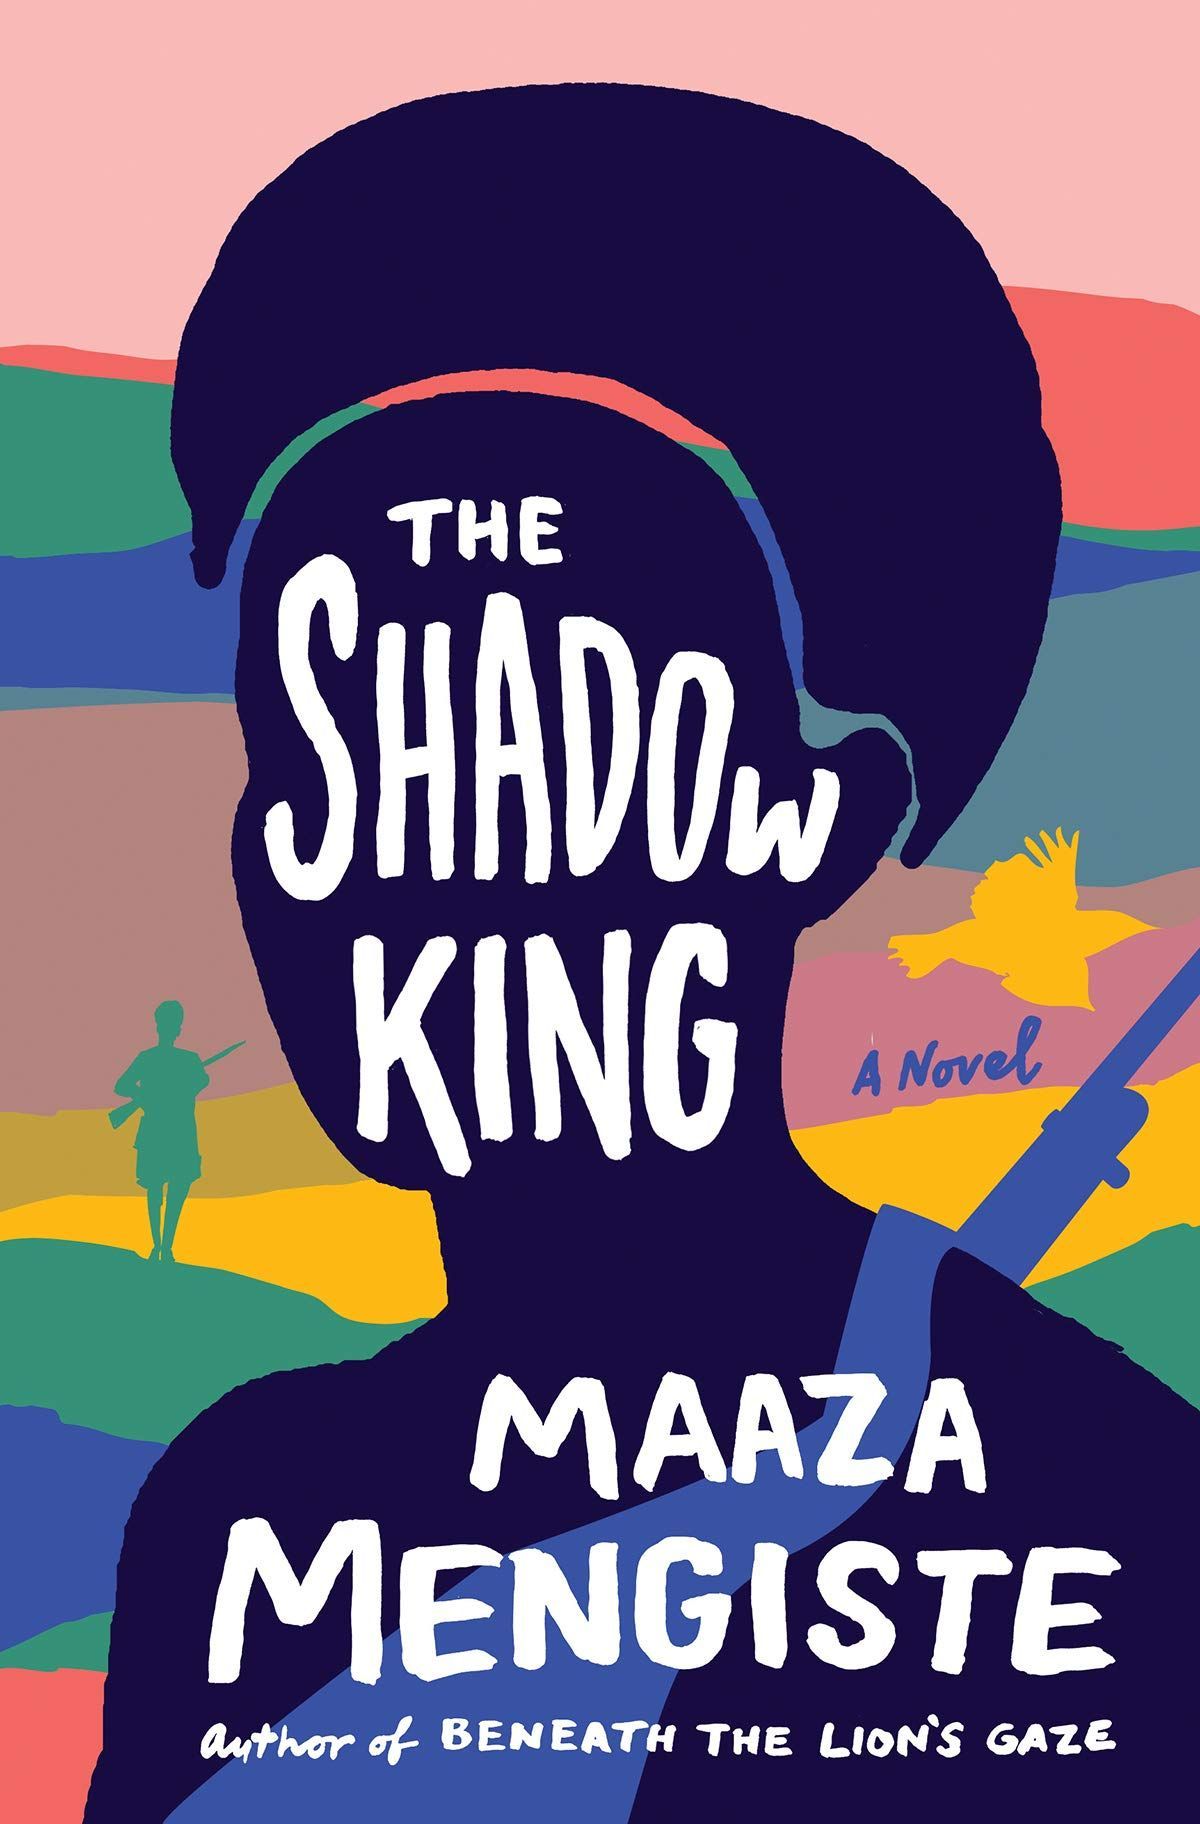 The Body Is a Battlefield: On Maaza Mengiste’s “The Shadow King”